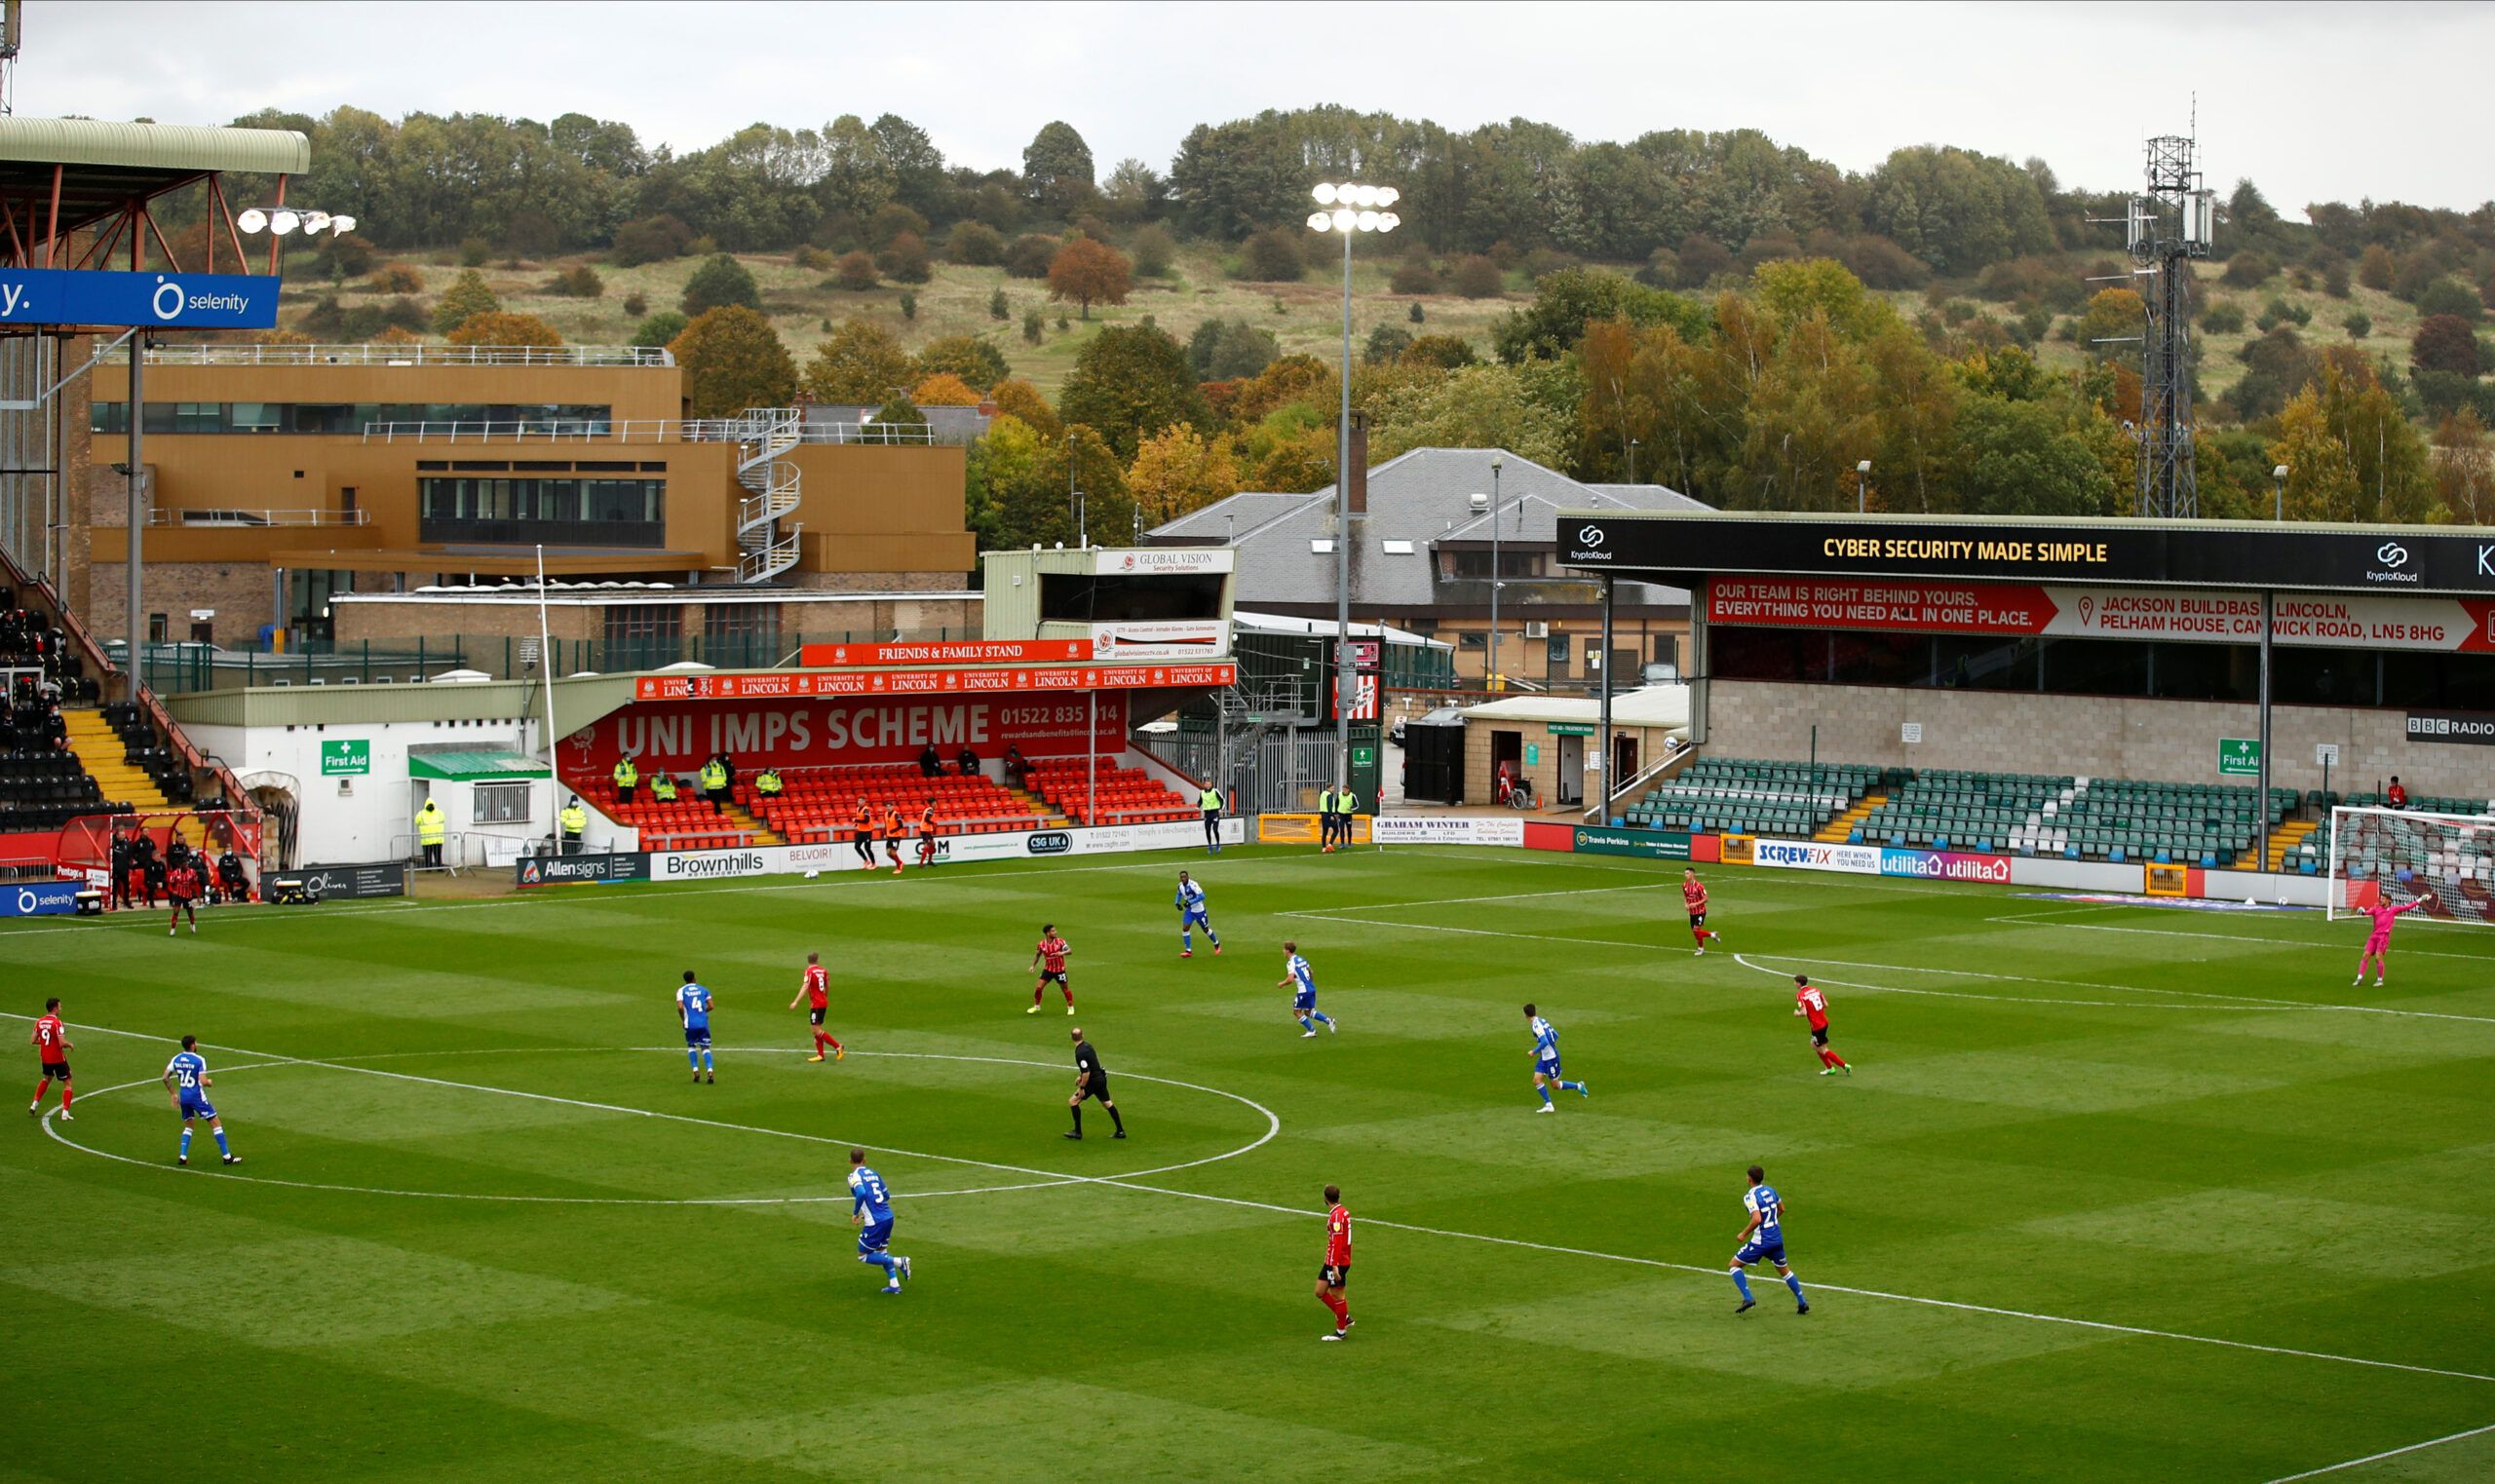 Soccer Football - League One - Lincoln City v Bristol Rovers - Sincil Bank, Lincoln, Britain - October 10, 2020  General view during the match  Action Images/Jason Cairnduff  EDITORIAL USE ONLY. No use with unauthorized audio, video, data, fixture lists, club/league logos or 